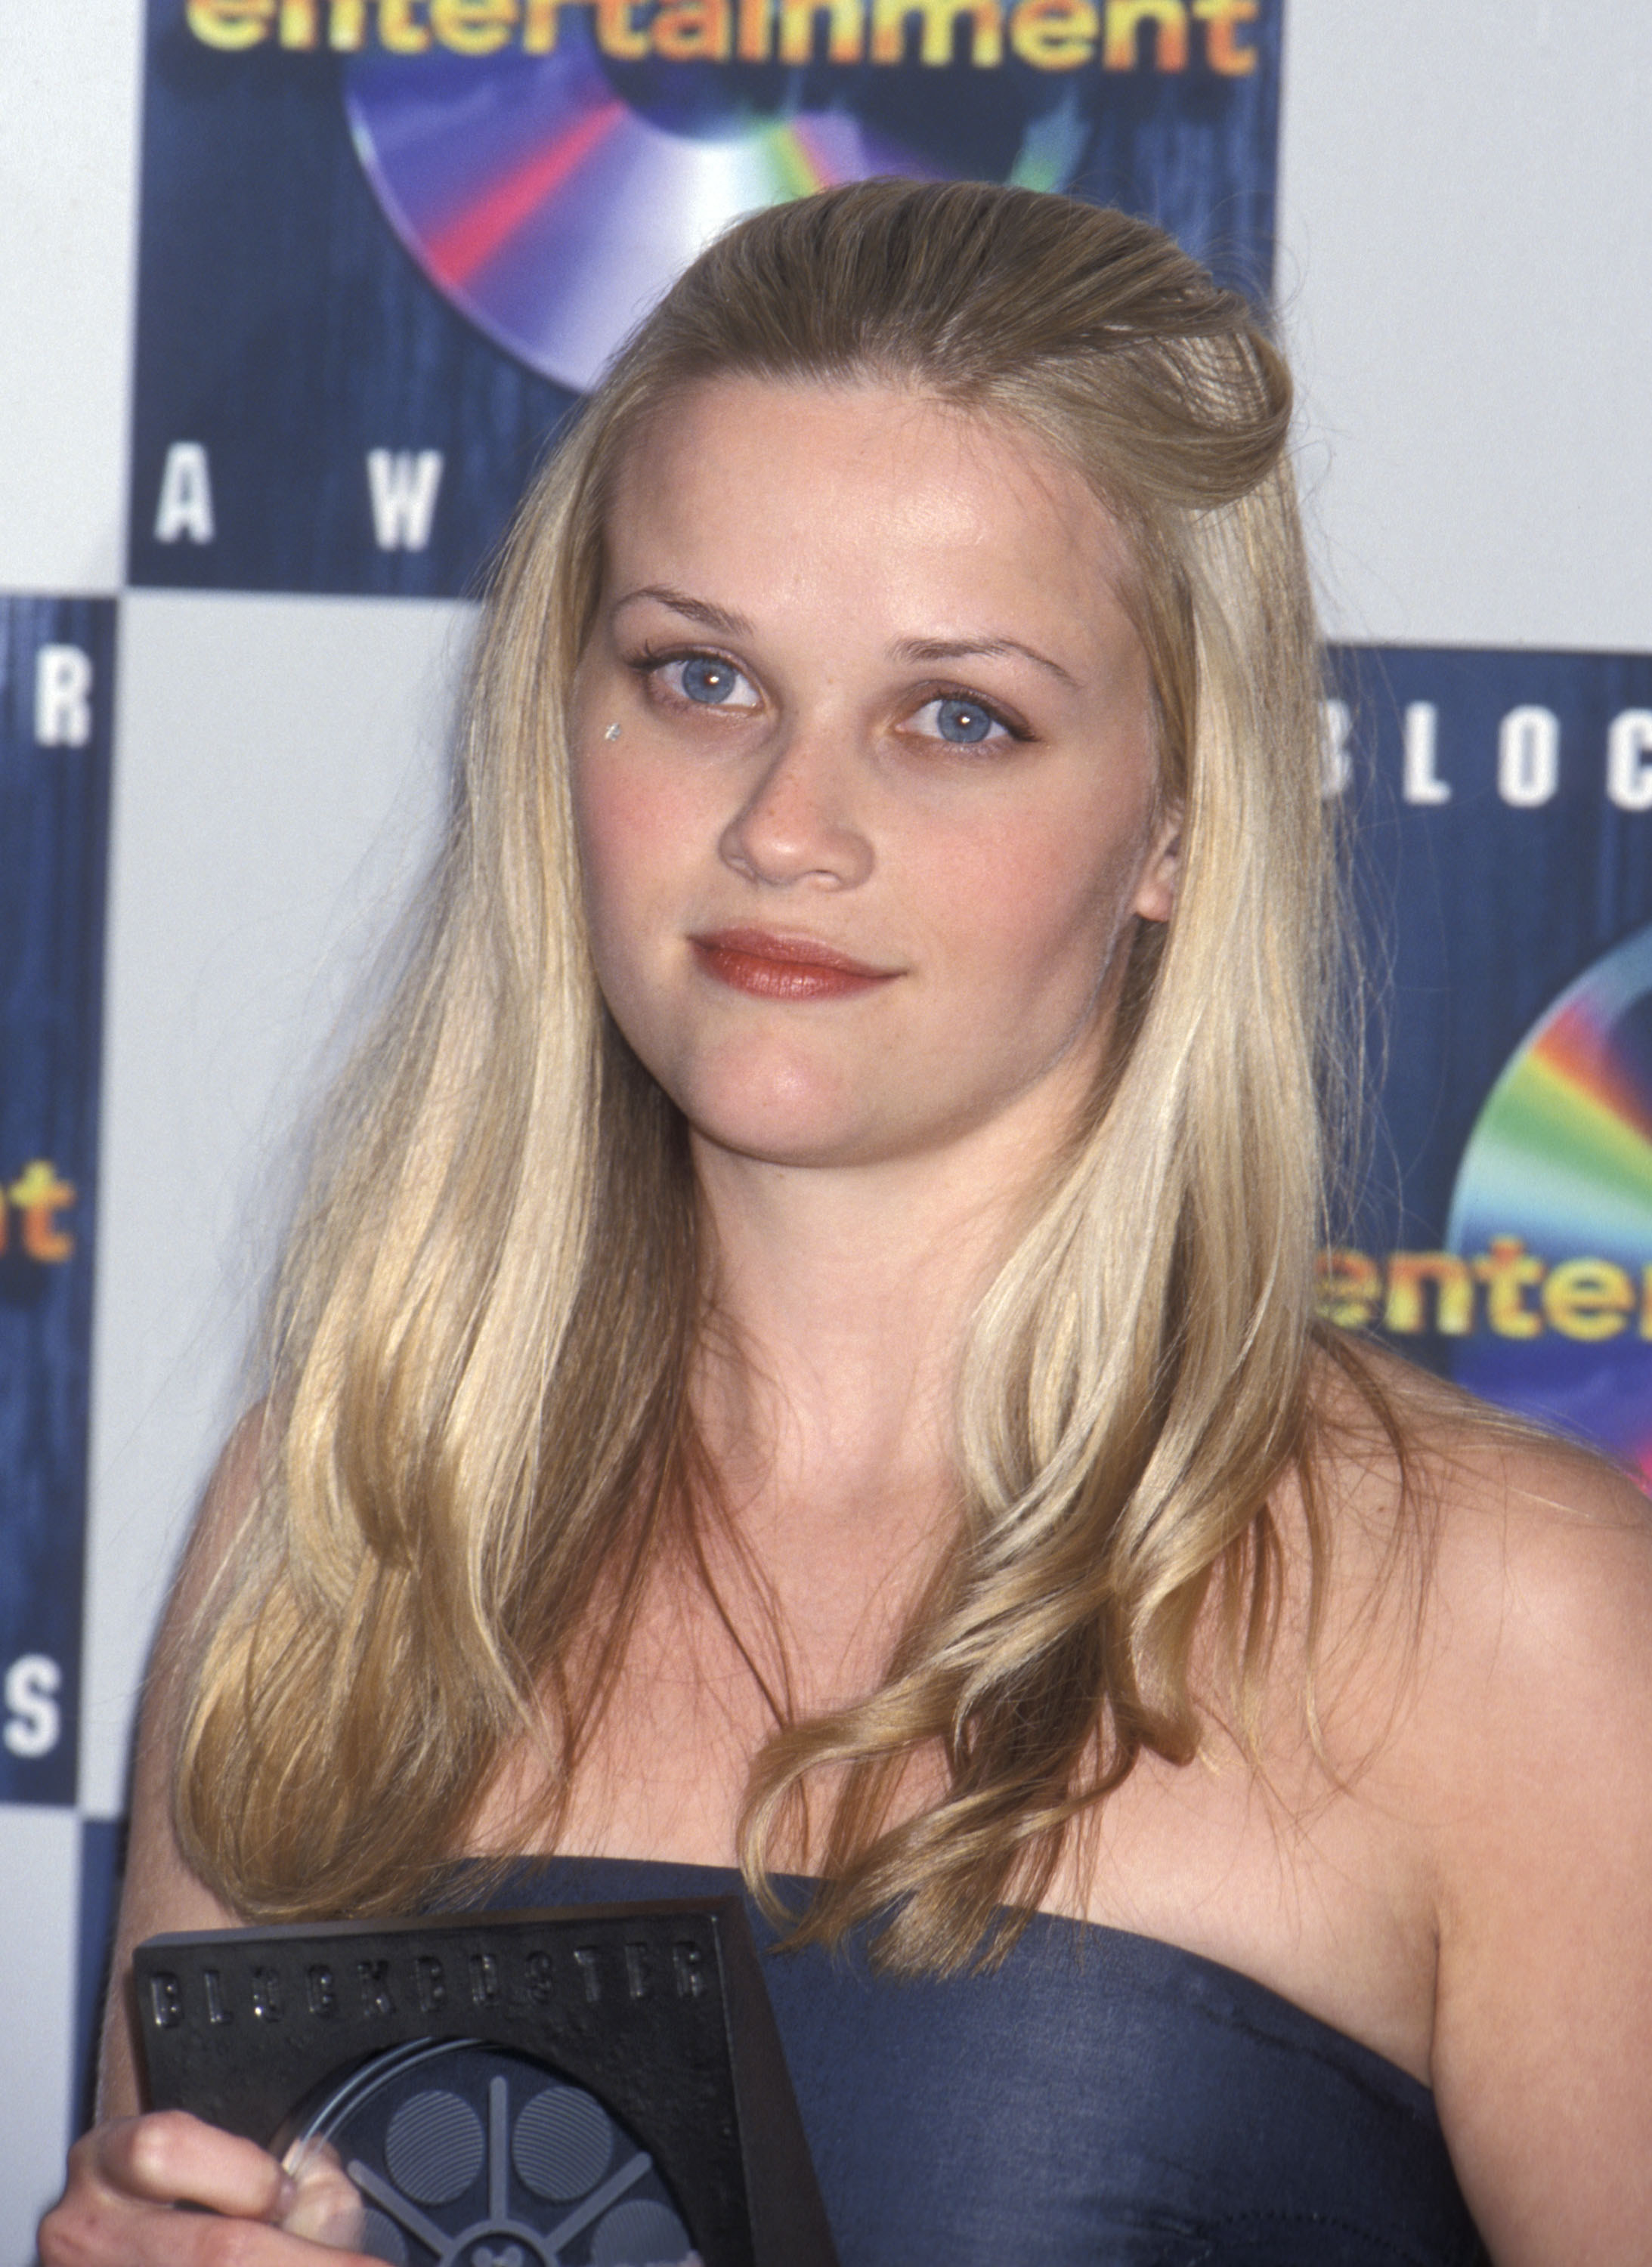 Reese Witherspoon attends the Sixth Annual Blockbuster Entertainment Awards on May 9, 2000